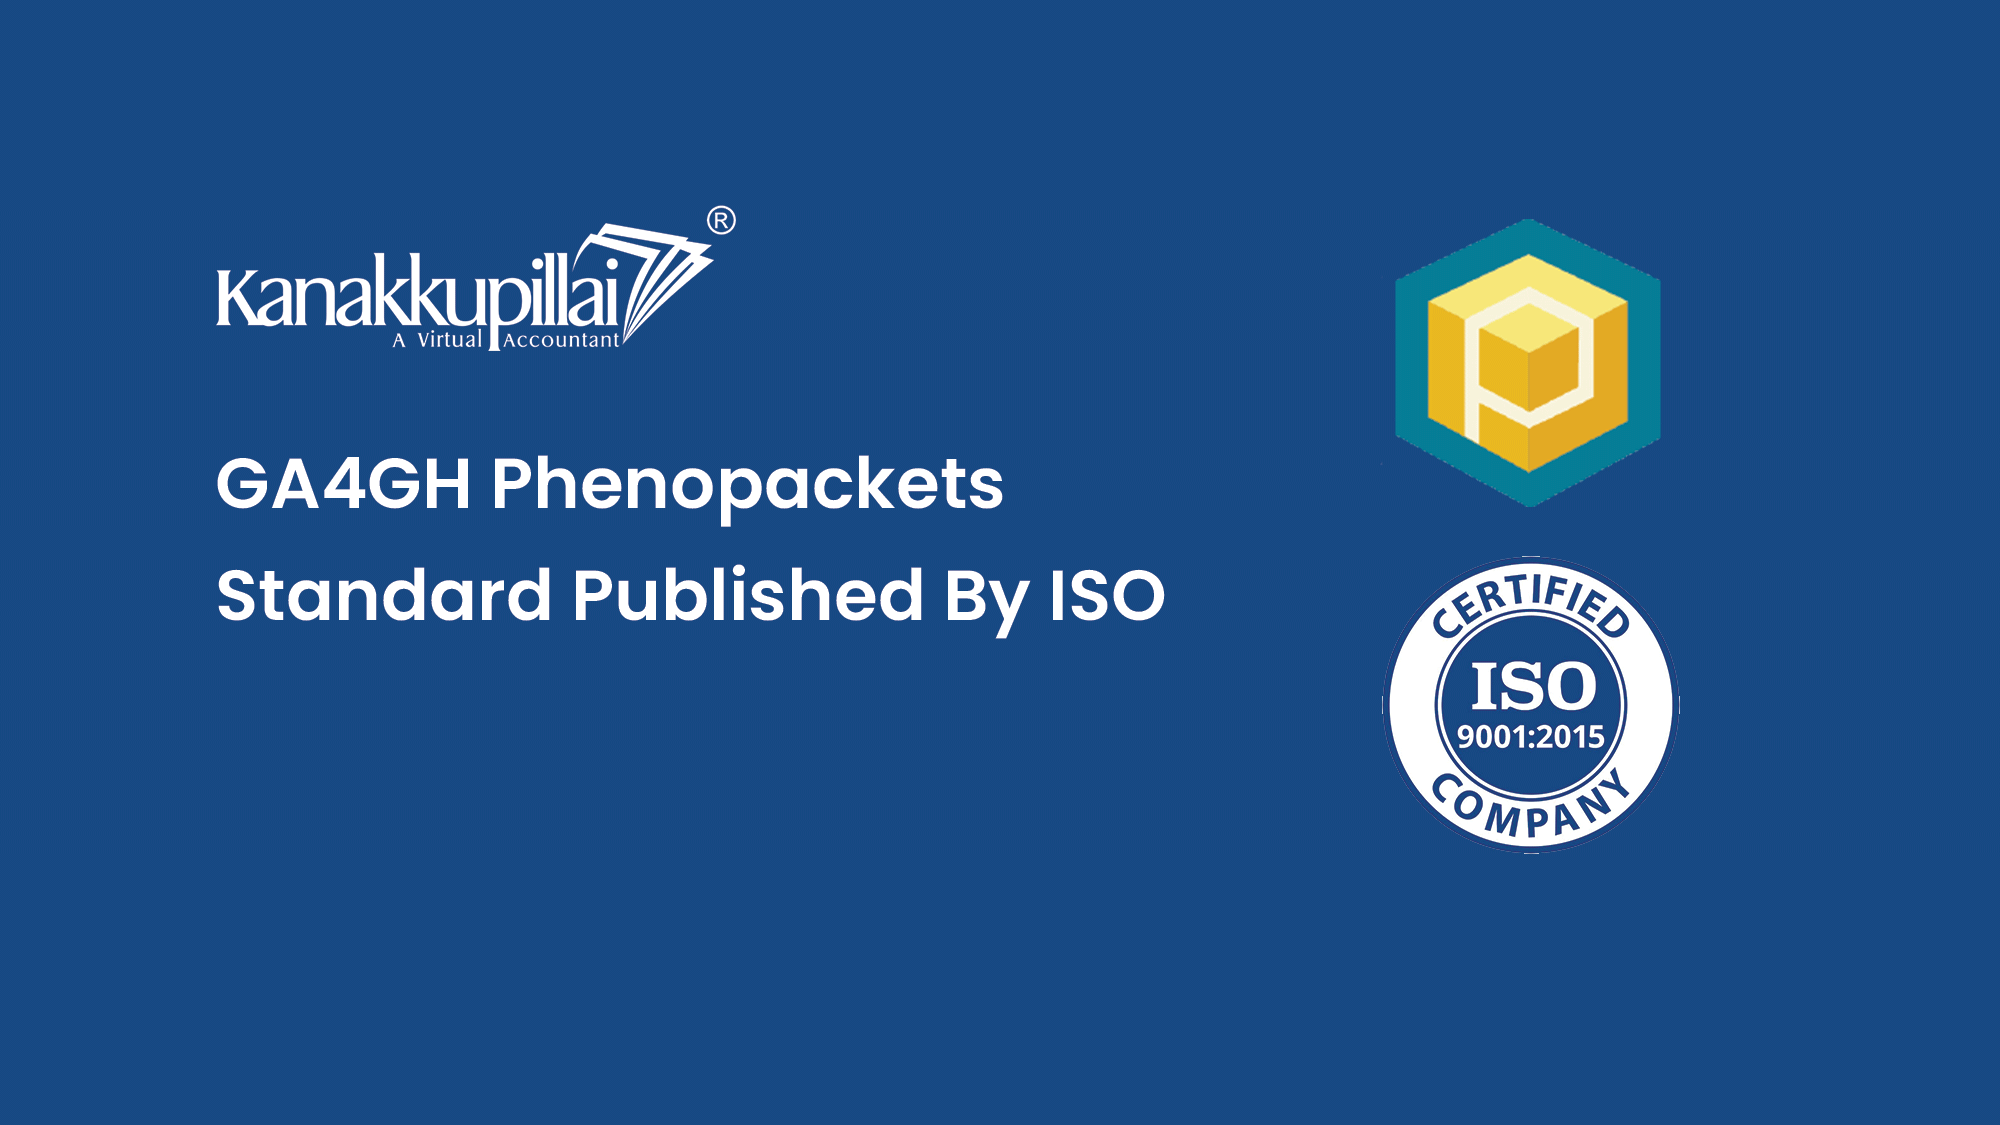 GA4GH Phenopackets Standard Published By ISO